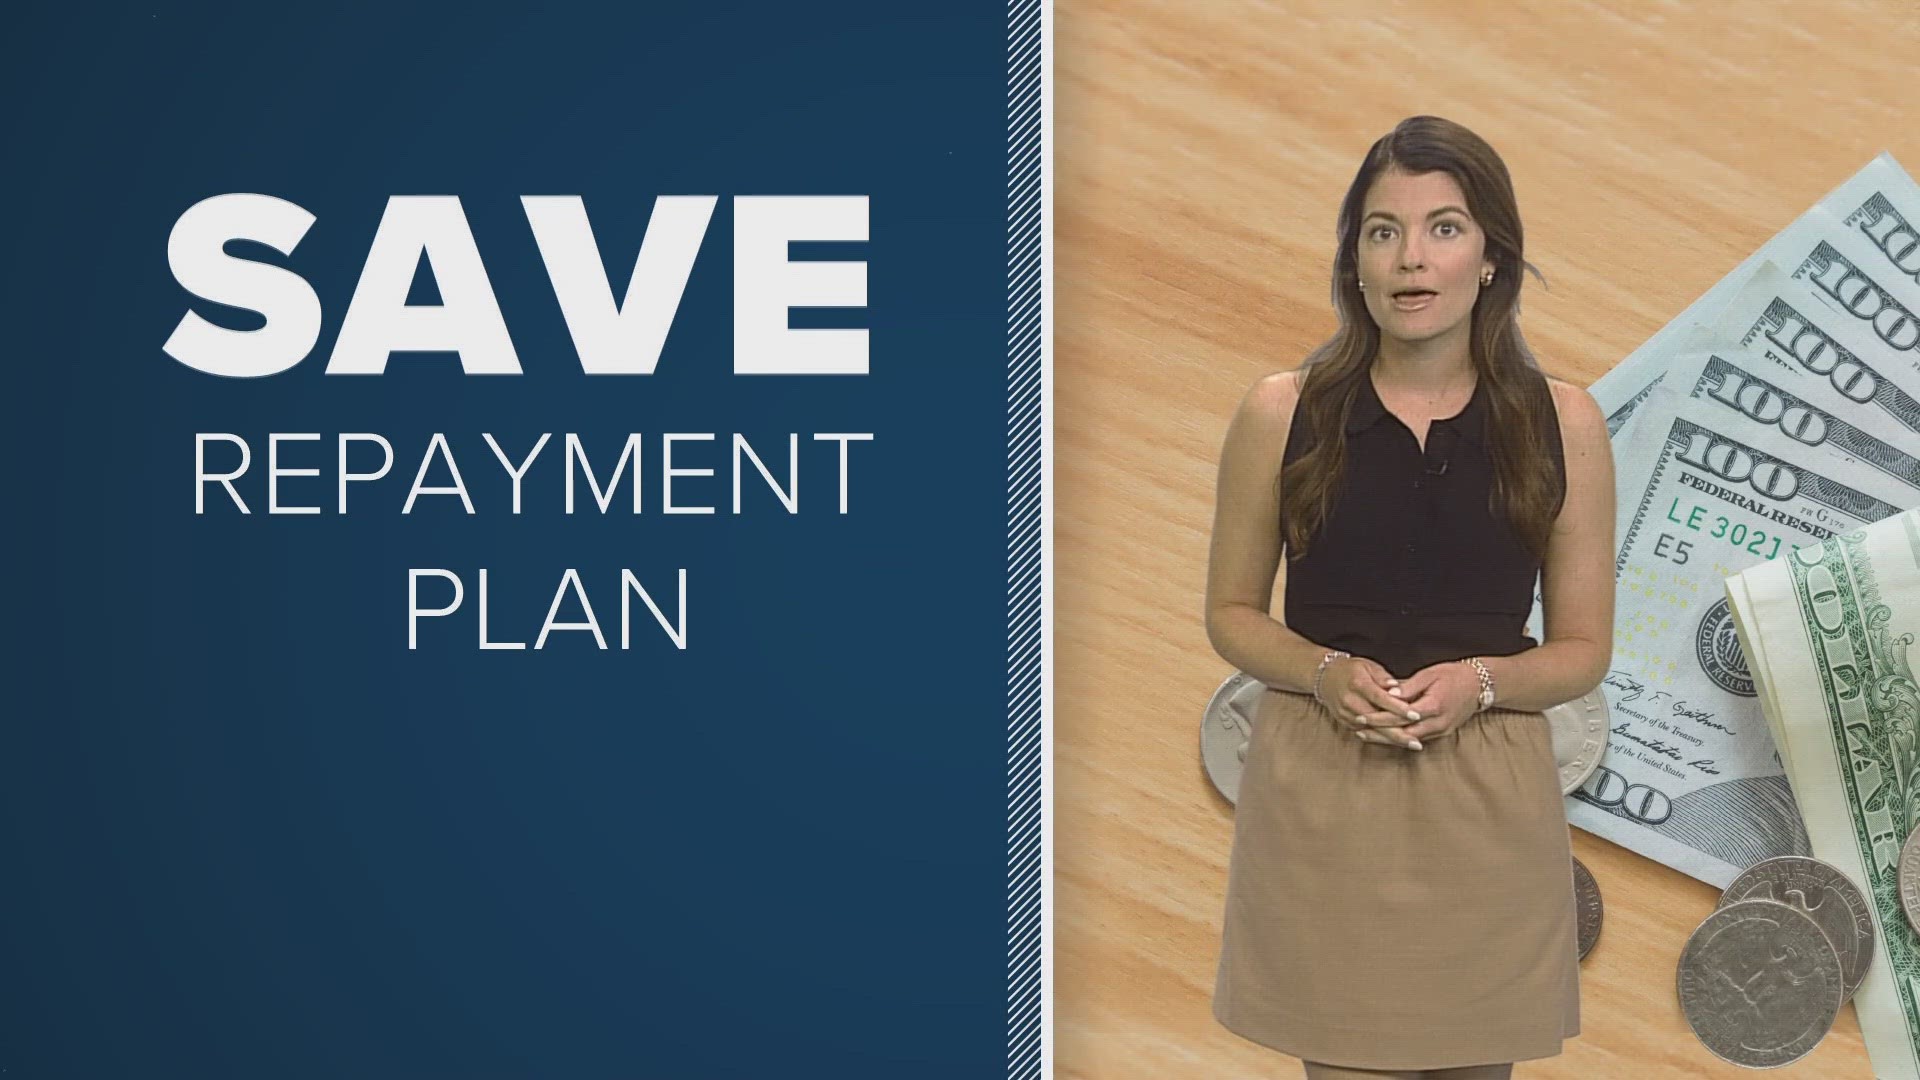 SAVE is an income-driven repayment plan. That means your payment is determined by your income and family size.